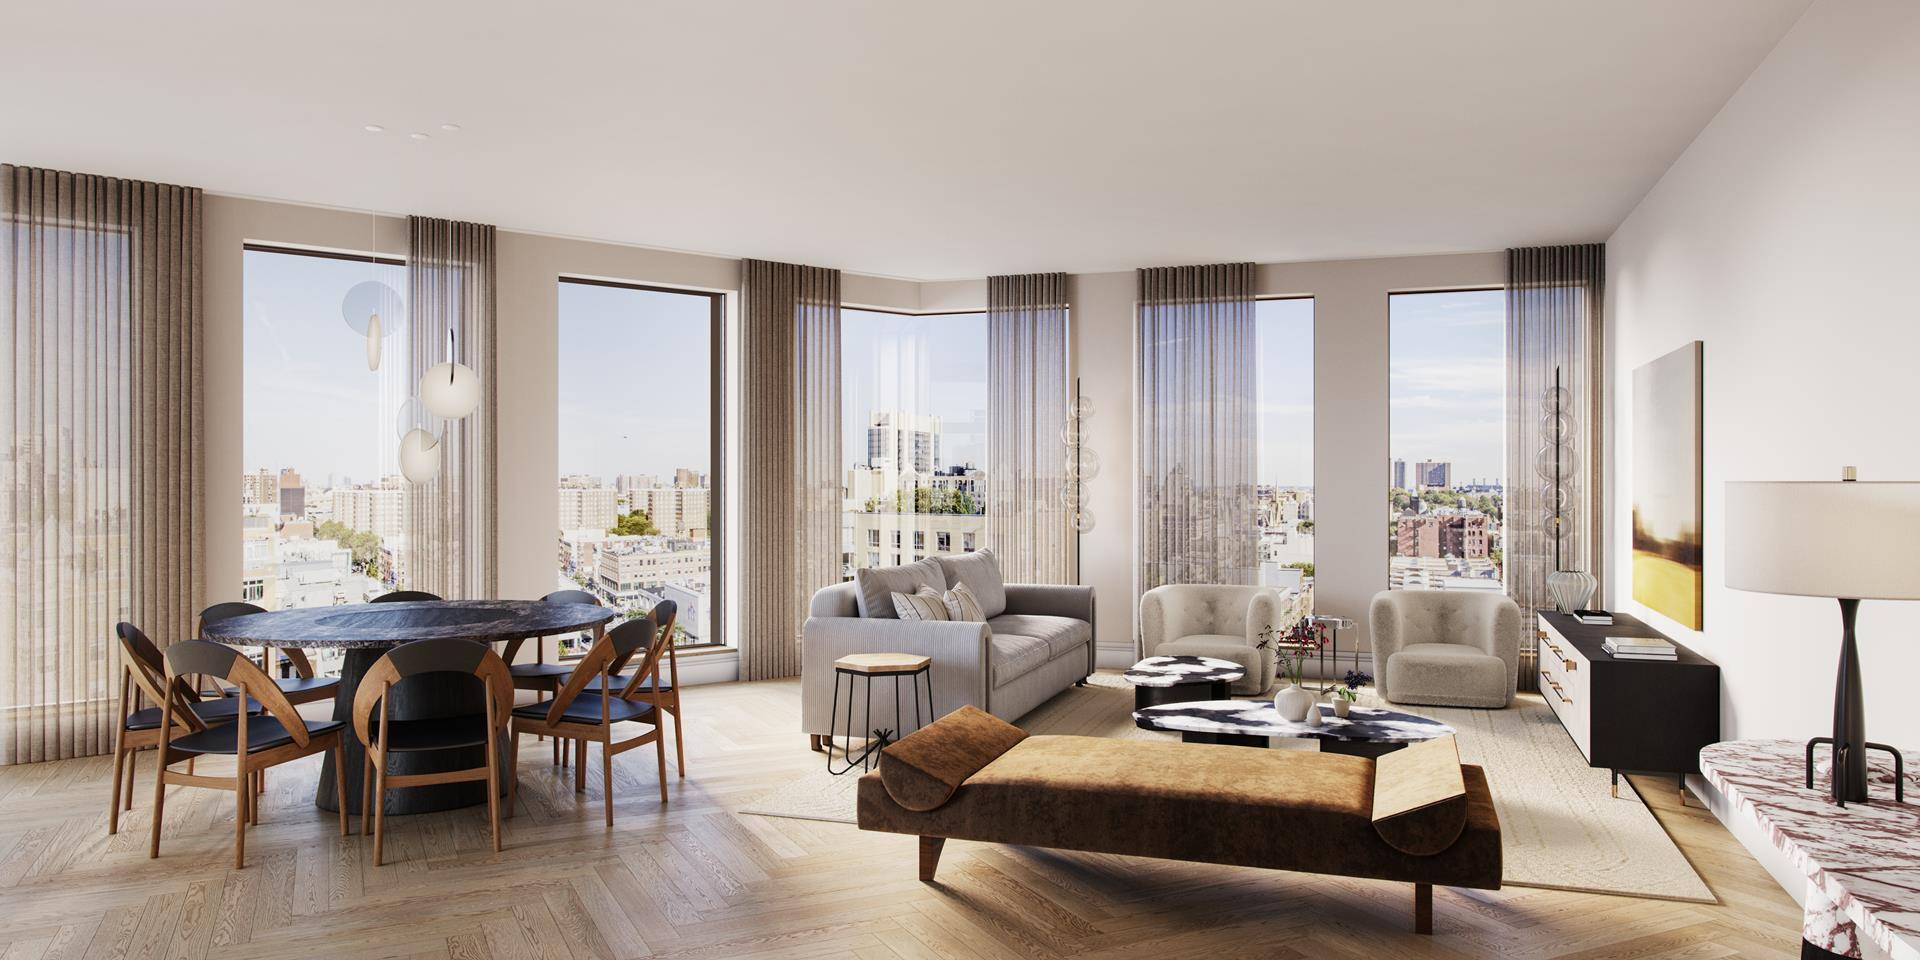 Sales Gallery Now Open By Appointment Introducing residence 11I at 300 West, a 1, 085 square foot northwestern facing two bedroom, two bathroom, offering an enormous living and dining area ...